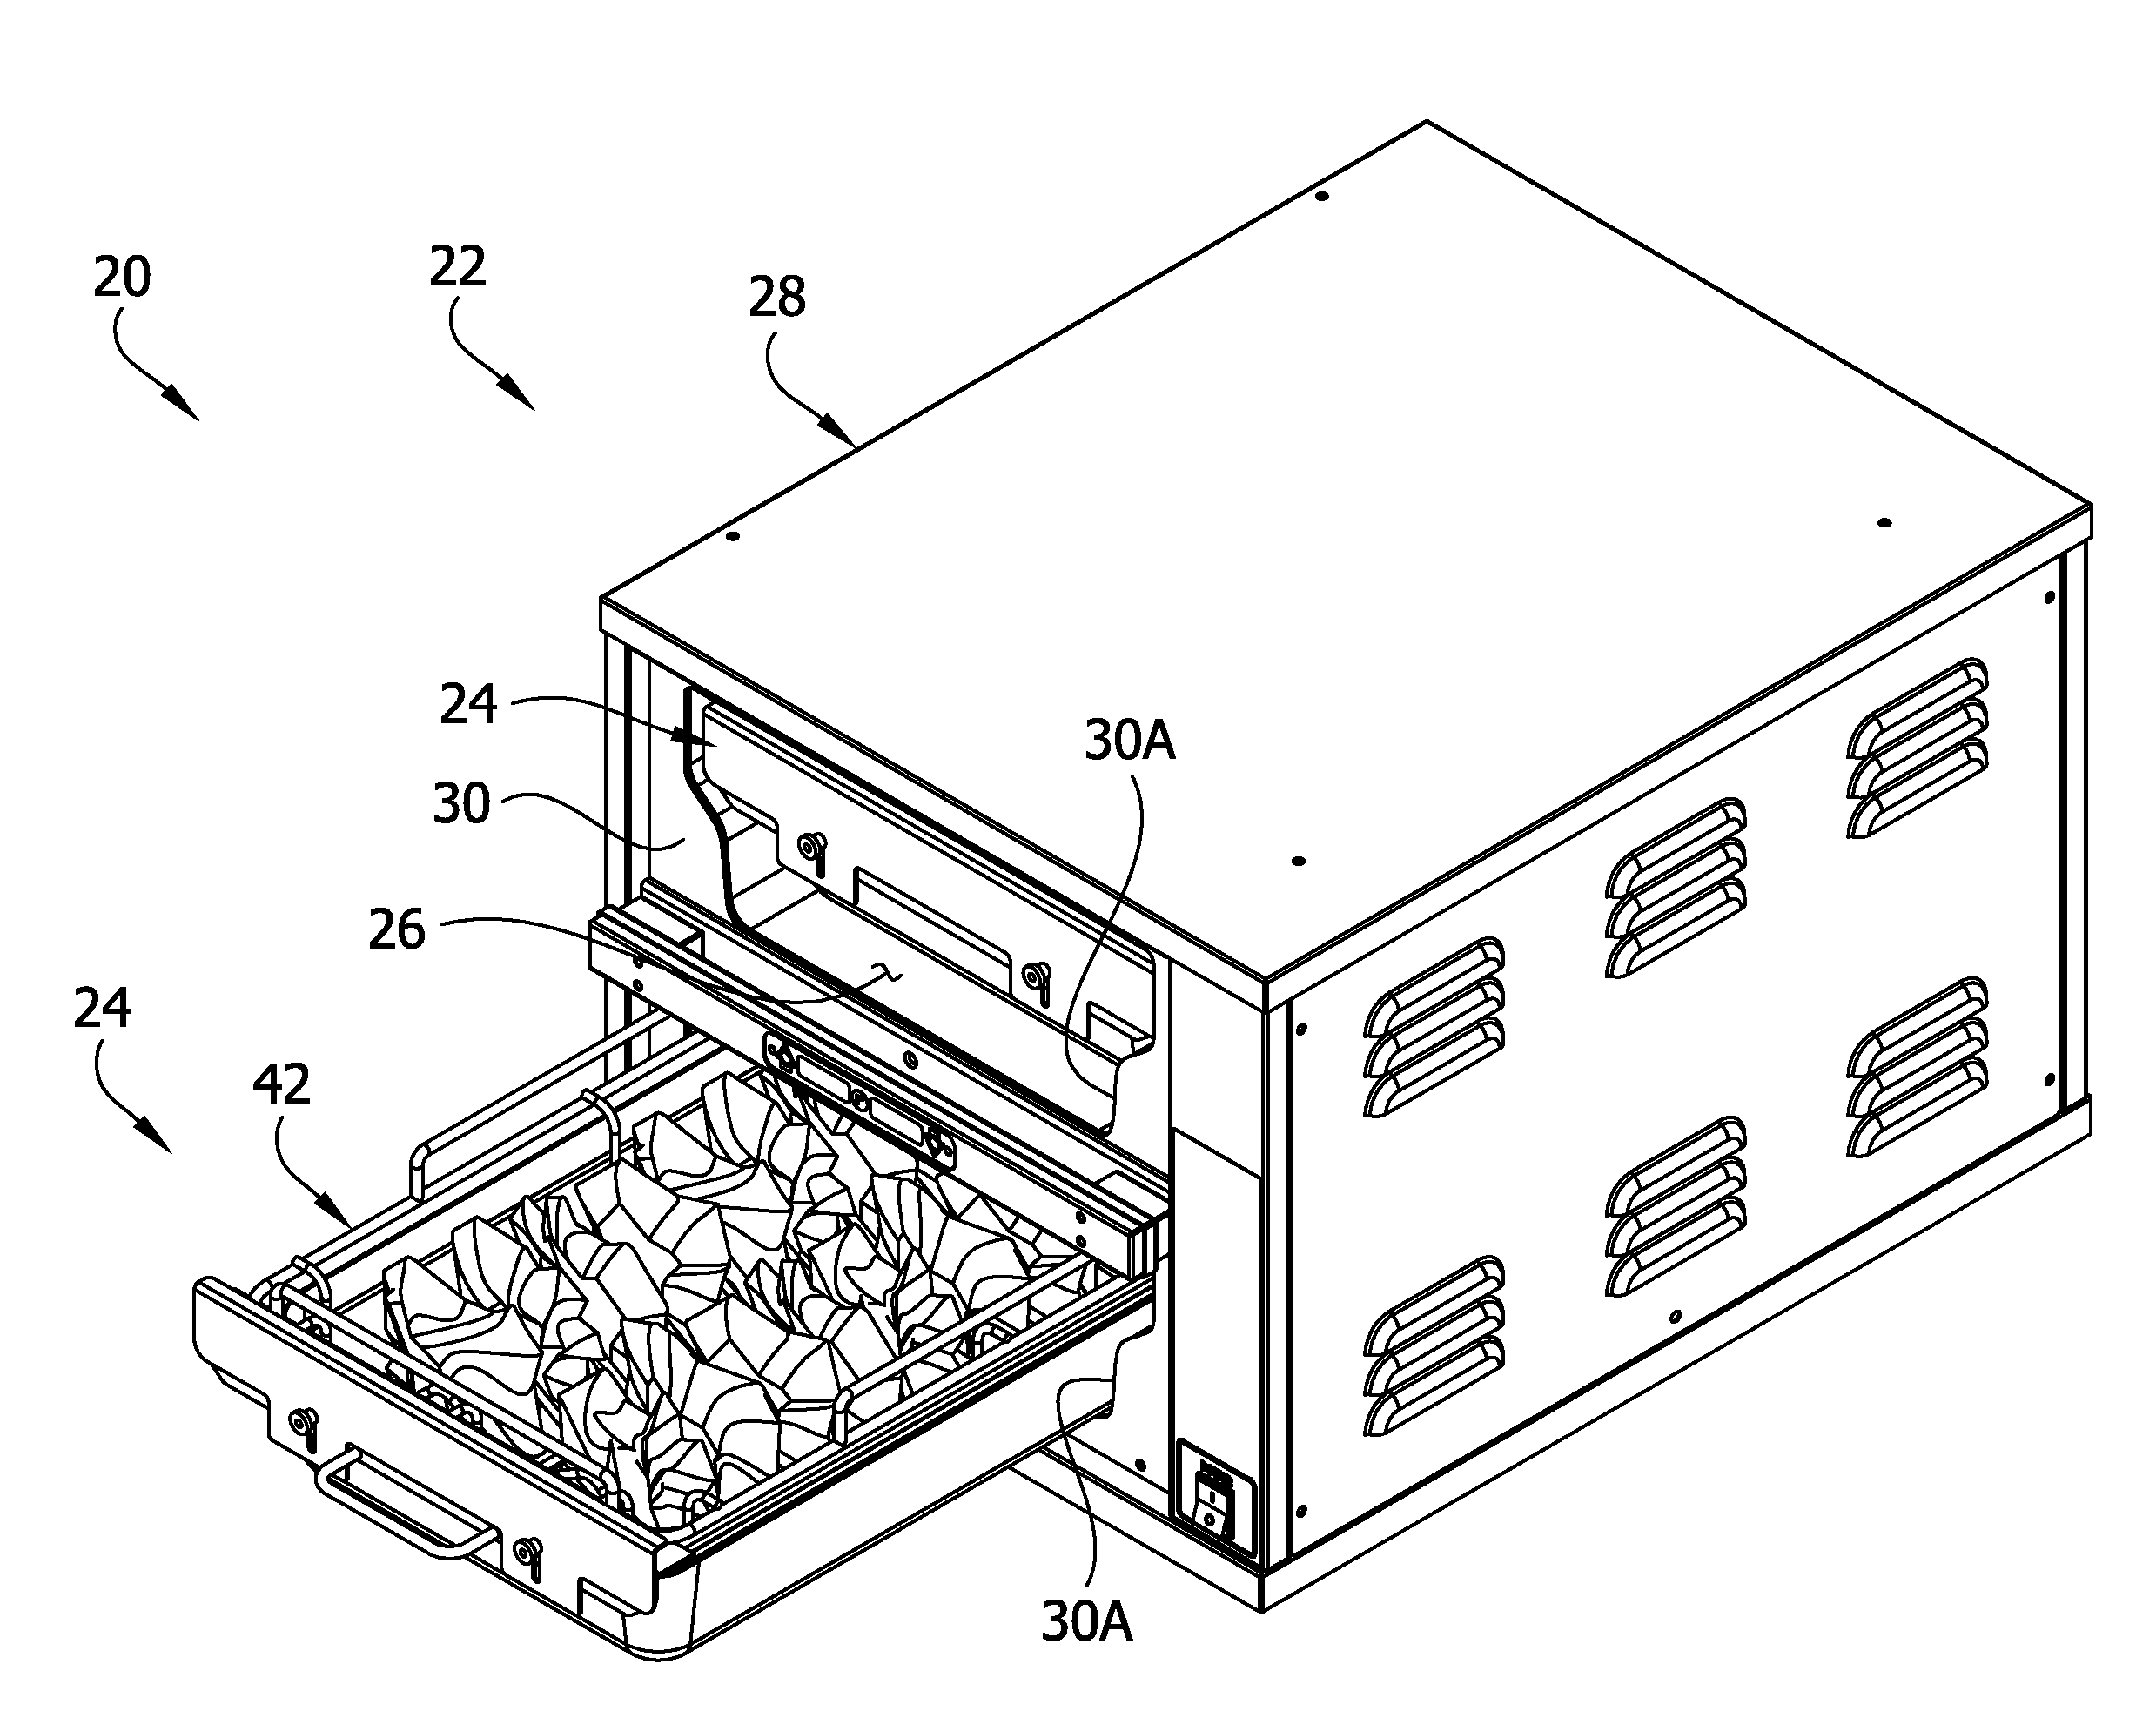 Oven and apparatus for holding a food item in an oven cavity